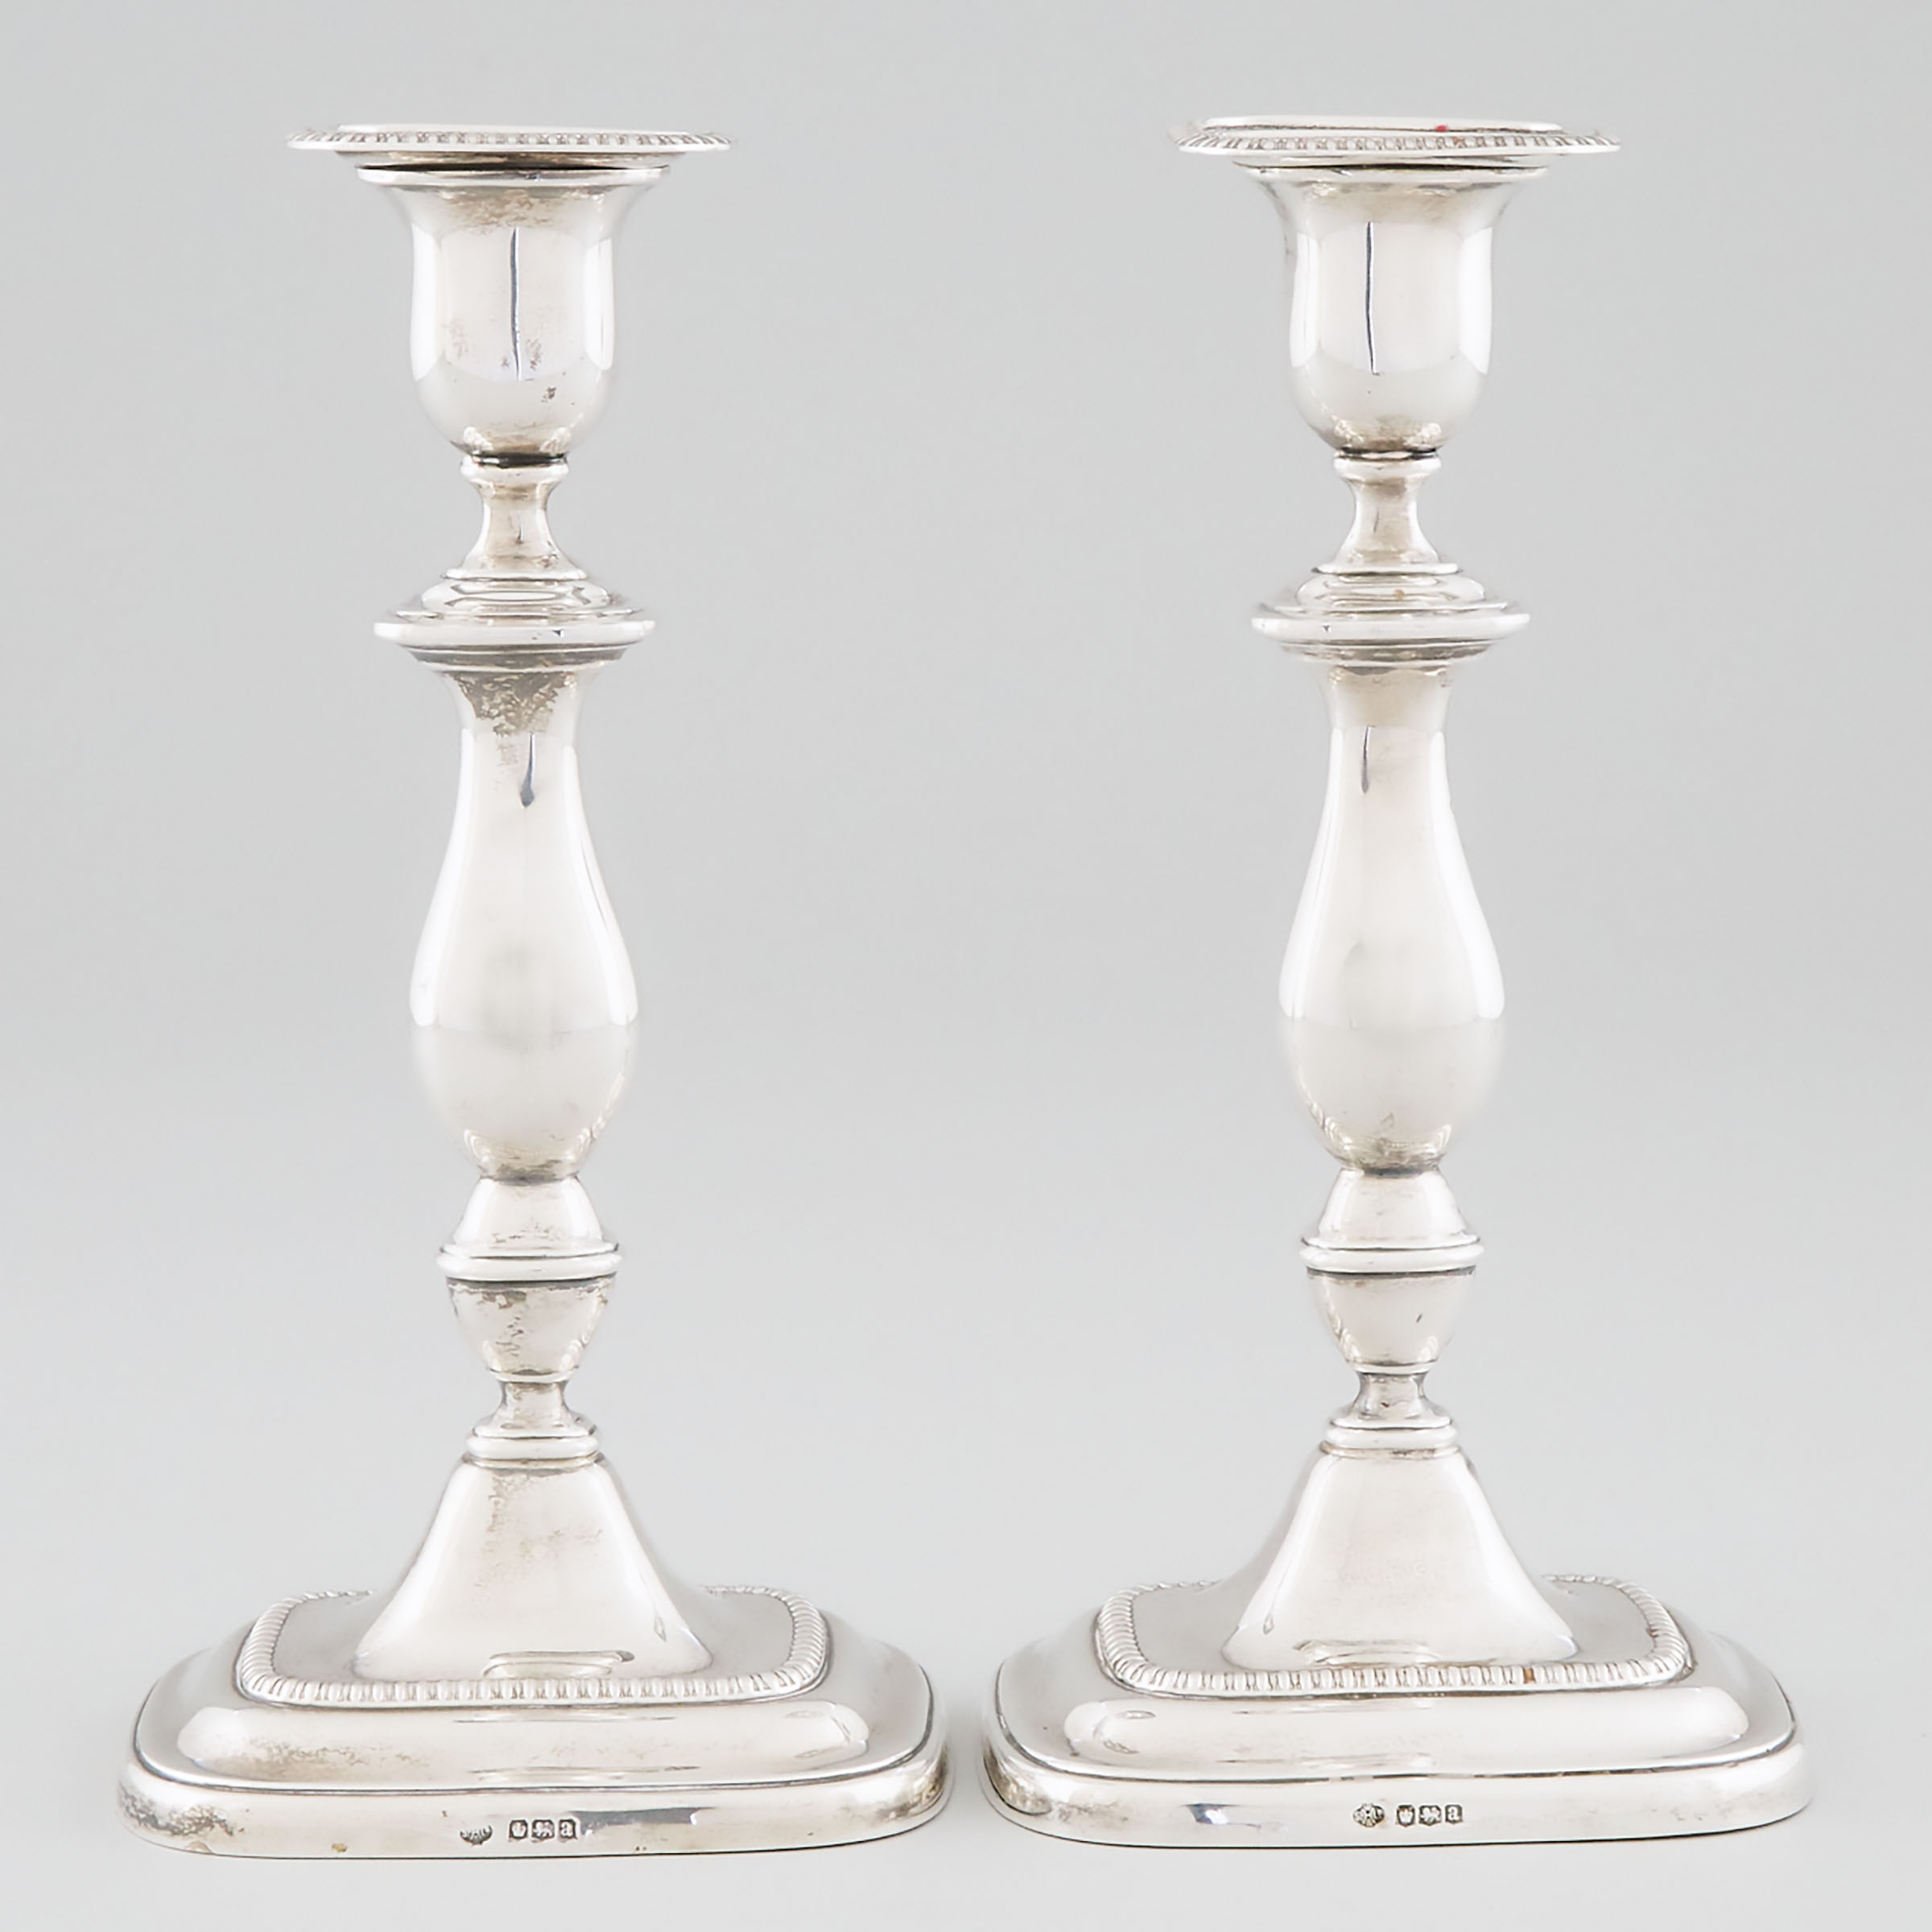 Pair of English Silver Table Candlesticks,